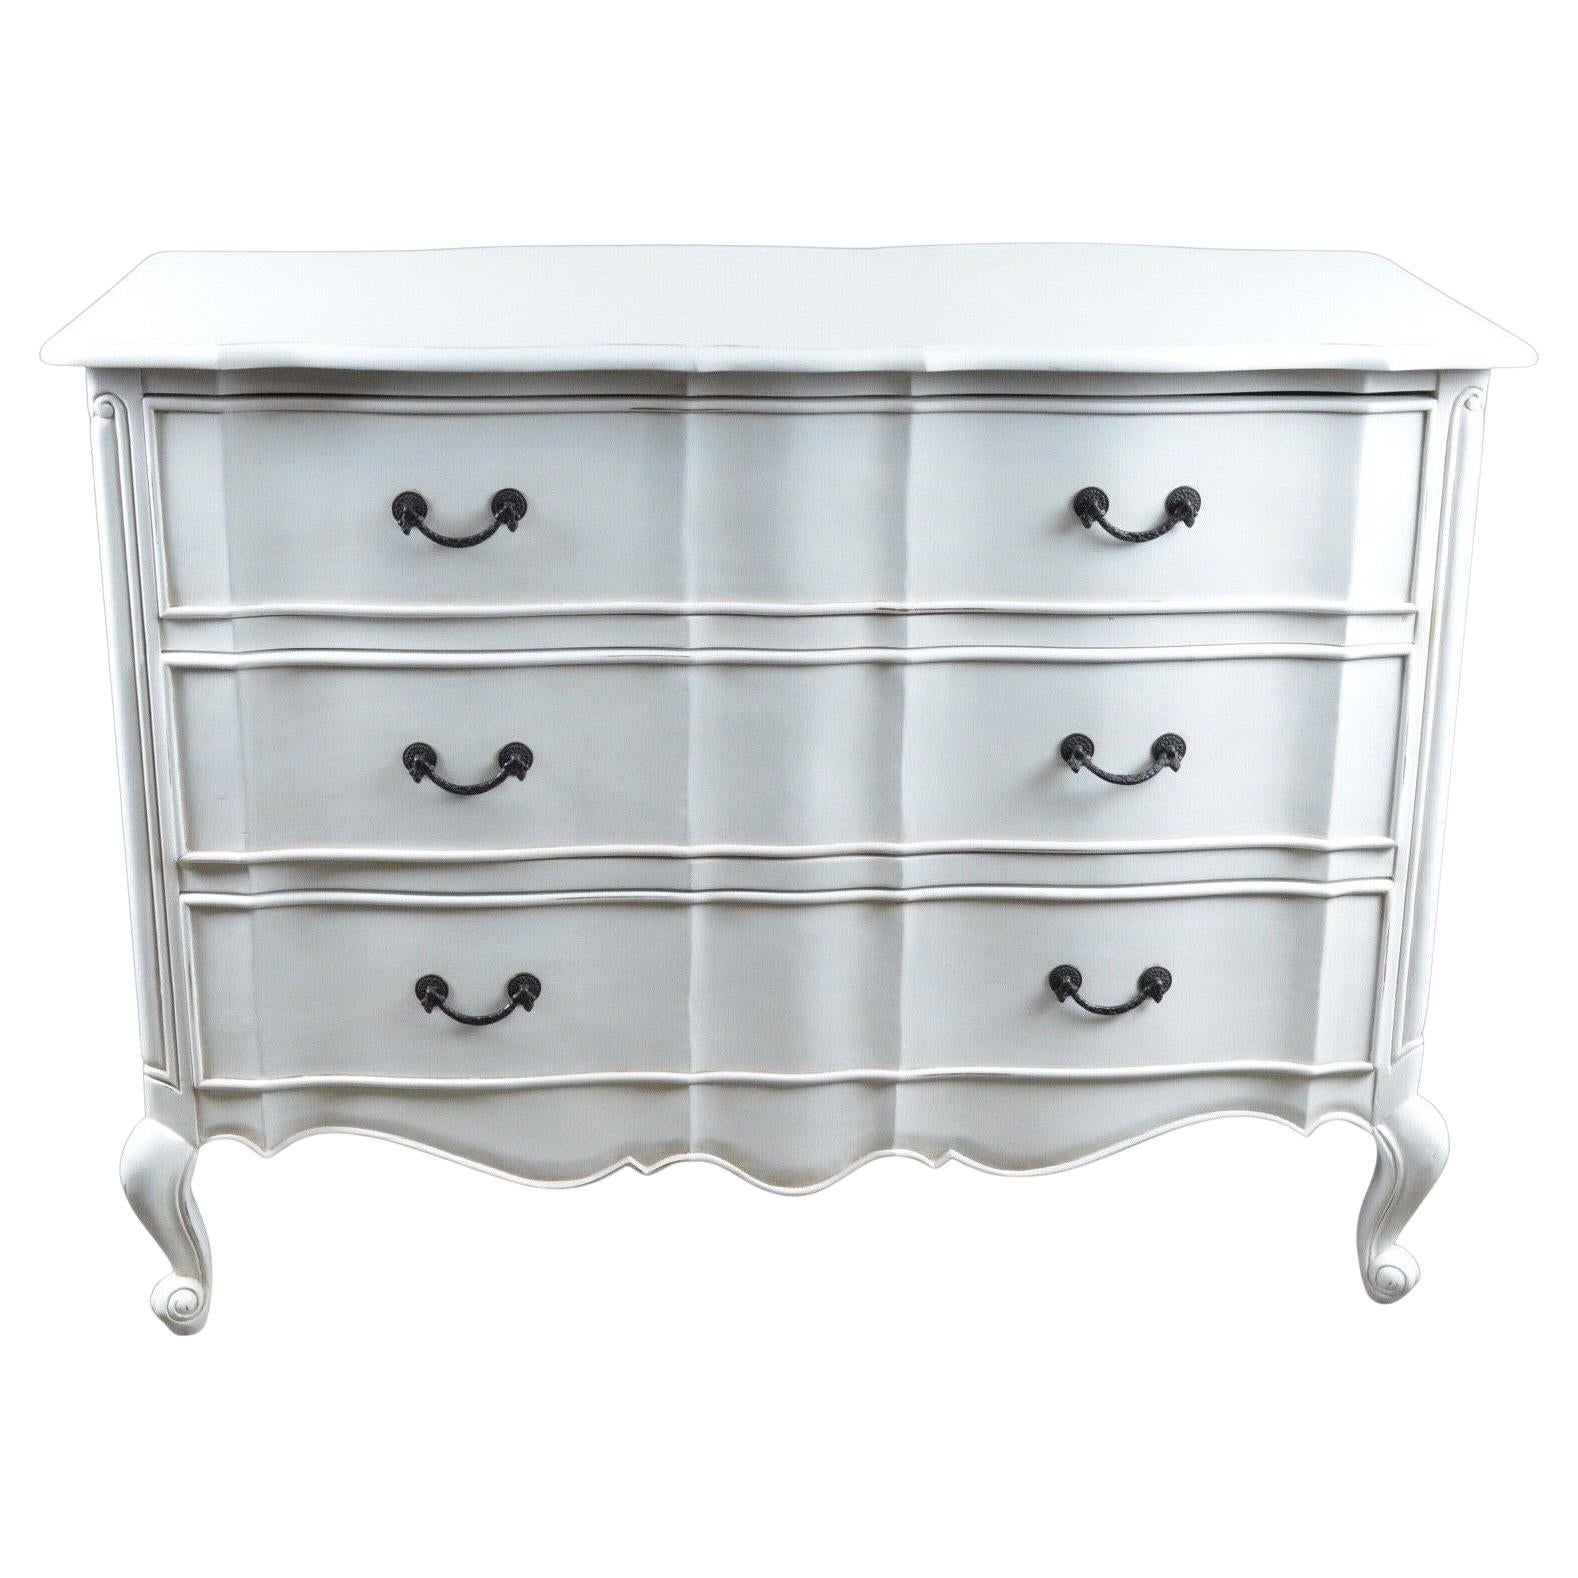 We are delighted to offer for sale this carved mahogany, hand finished in a lightly distressed antique white, this French chest of drawers is serenely elegant and graceful. With rope-style dark metal handles, it is simple yet a chic and elegant